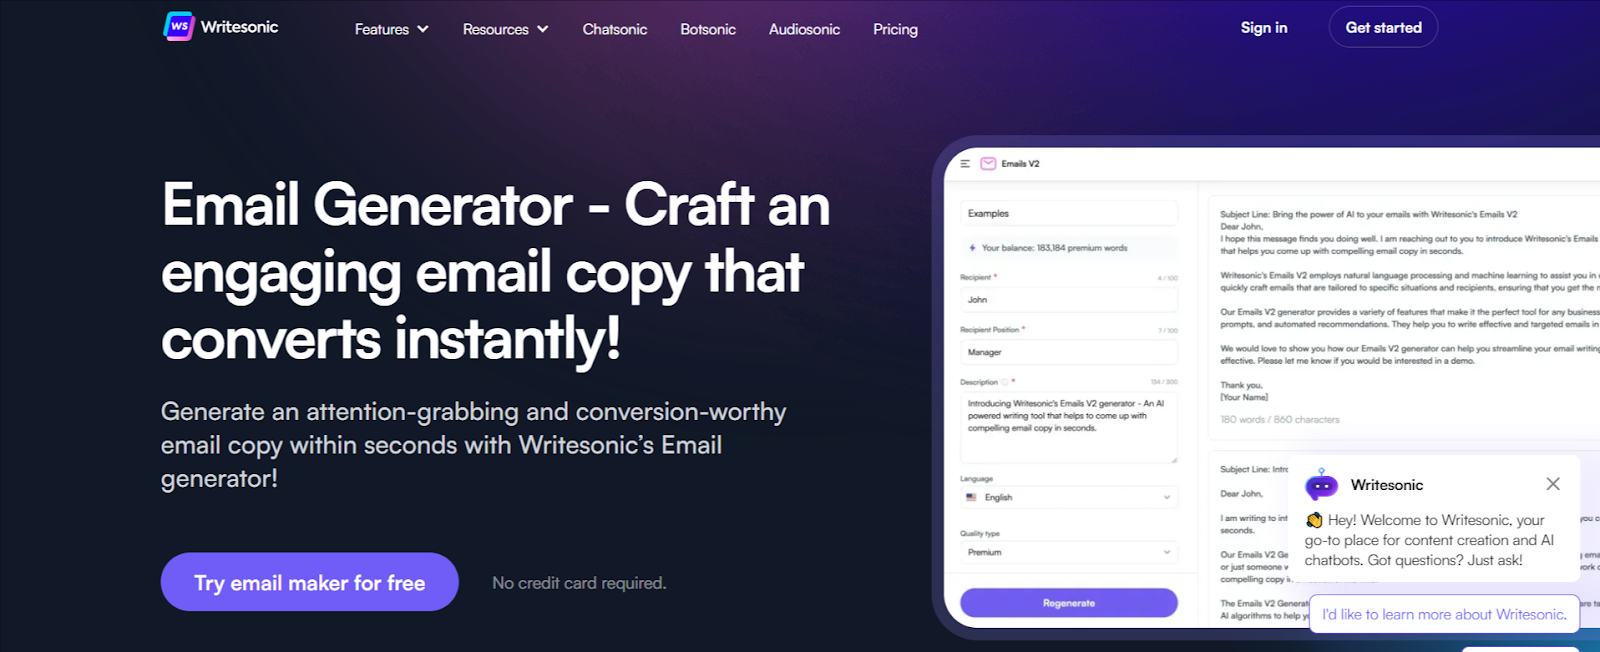 Writesonic: An Free AI Email Writing Assistant